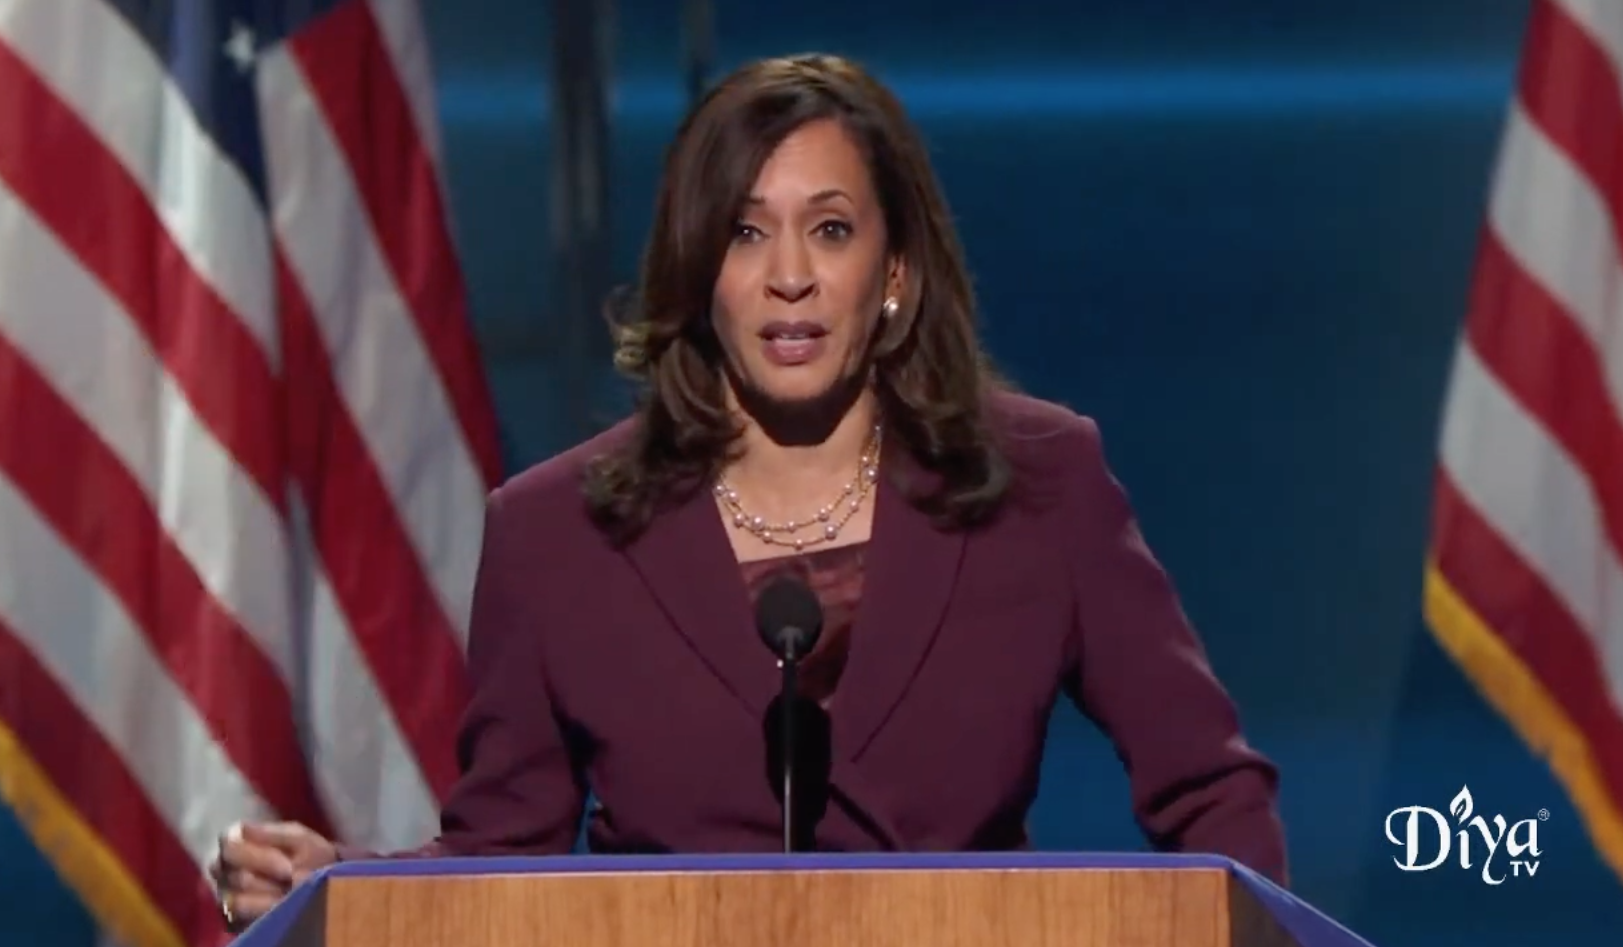 Kamala Devi Harris formally accepts the democratic party nomination for VP at DNC 2020